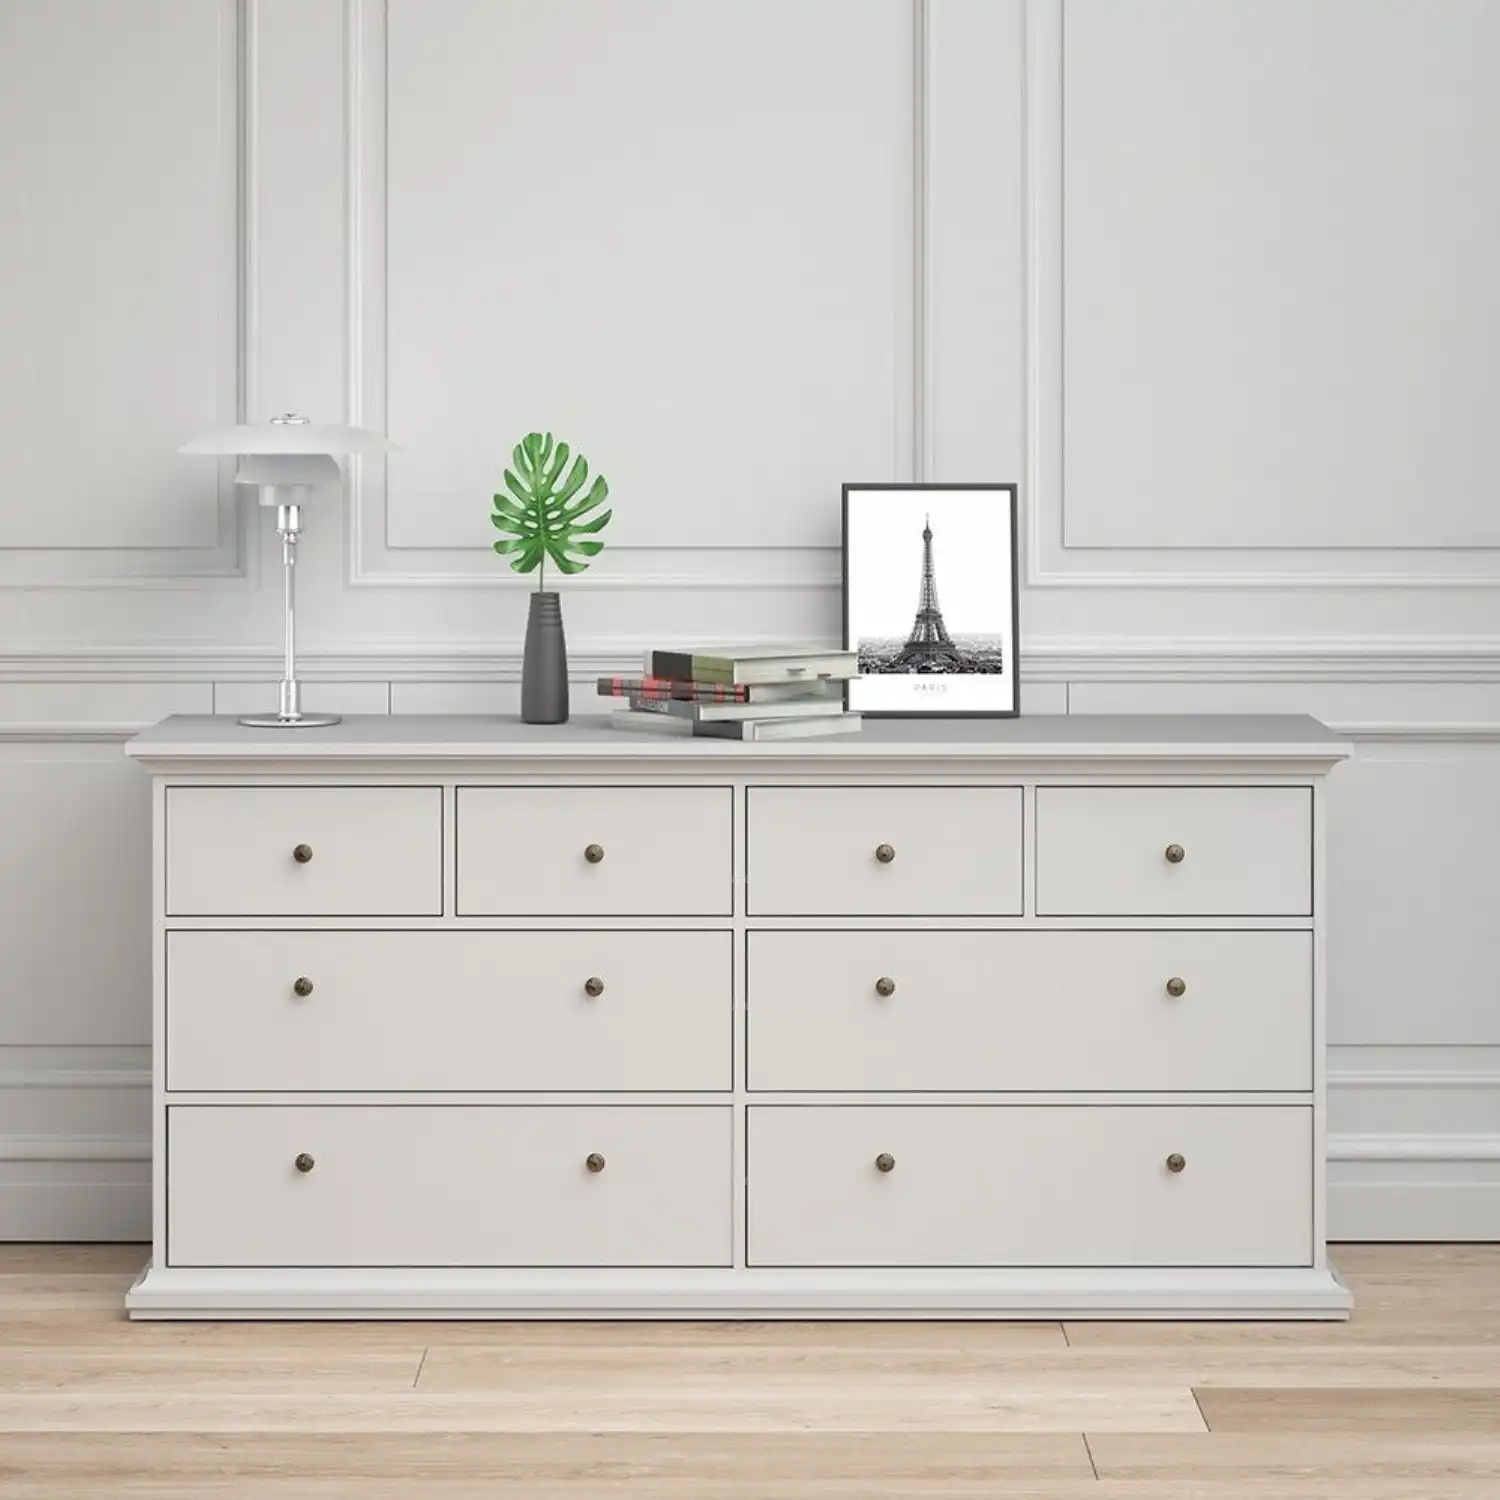 Large 180cm Wide White 8 Drawer Chest of Drawers